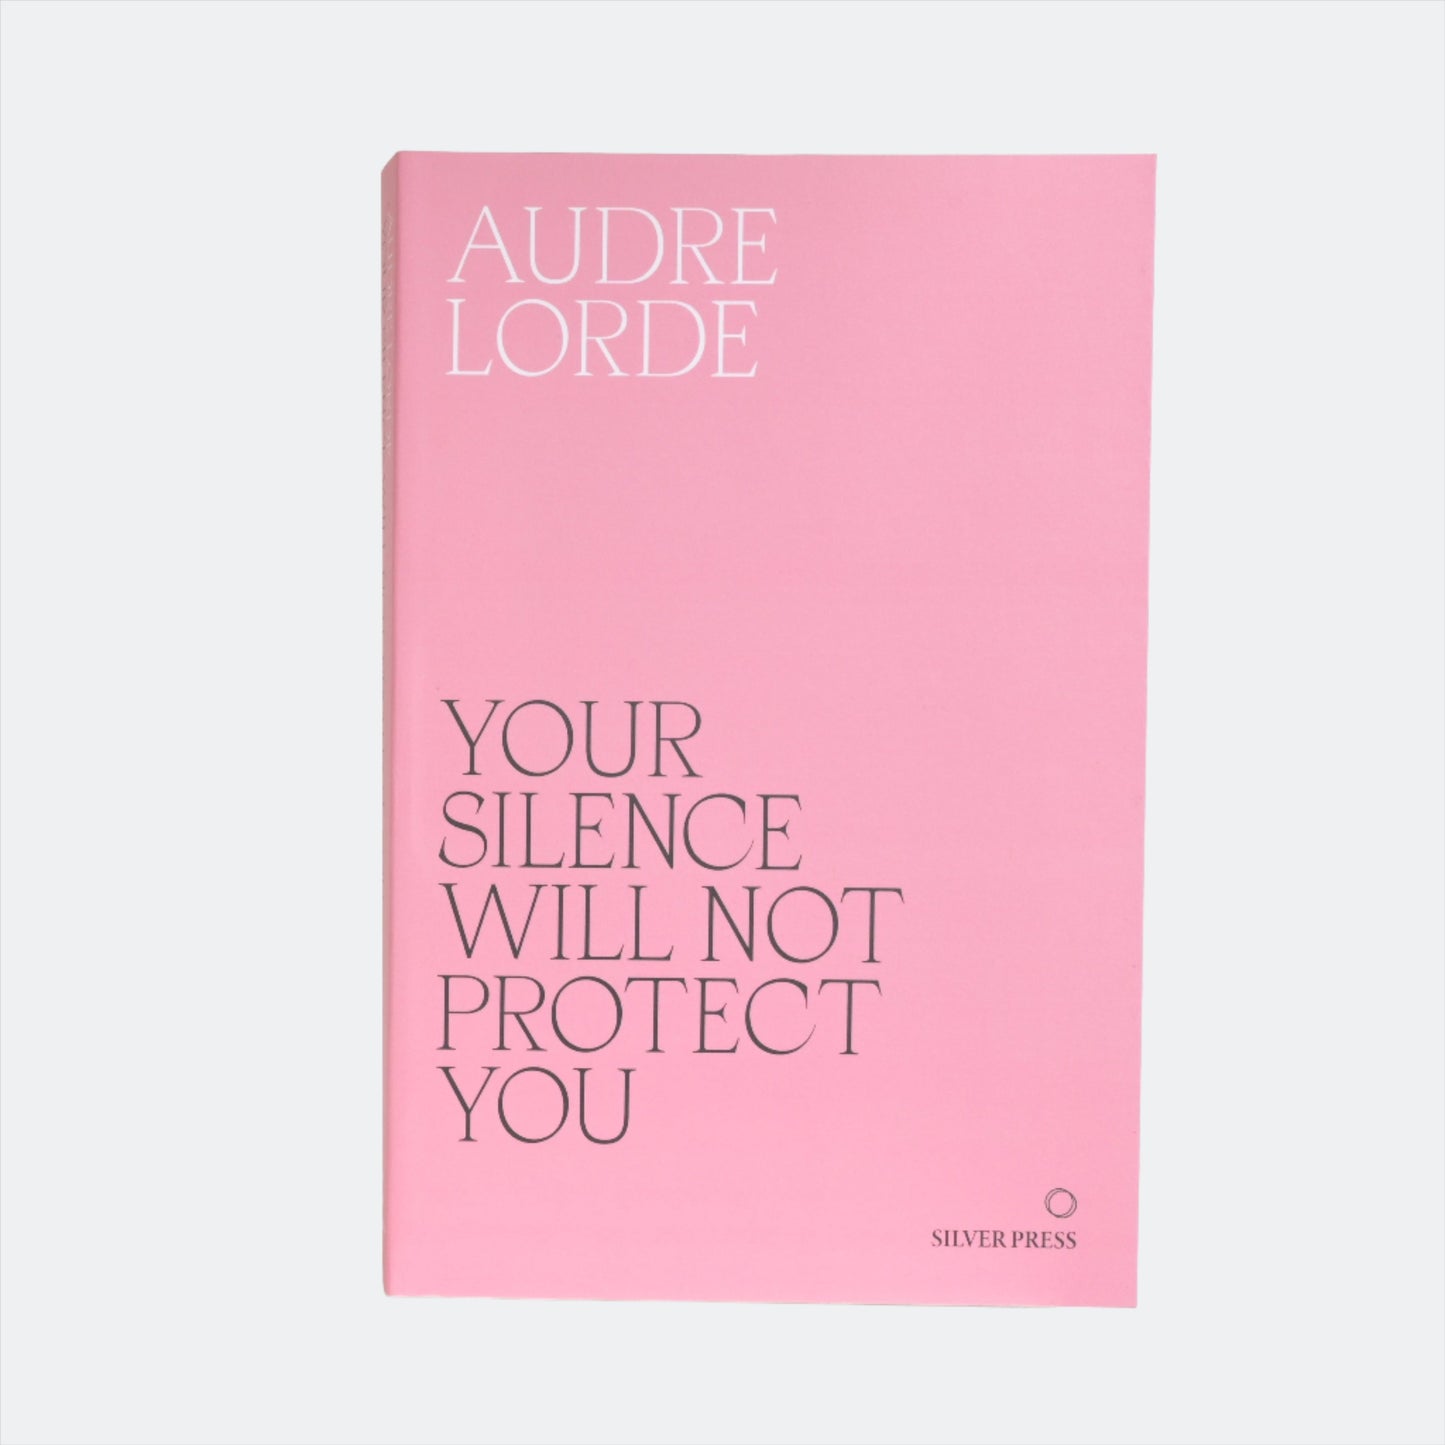 Audre Lorde: Your Silence Will Not Protect You